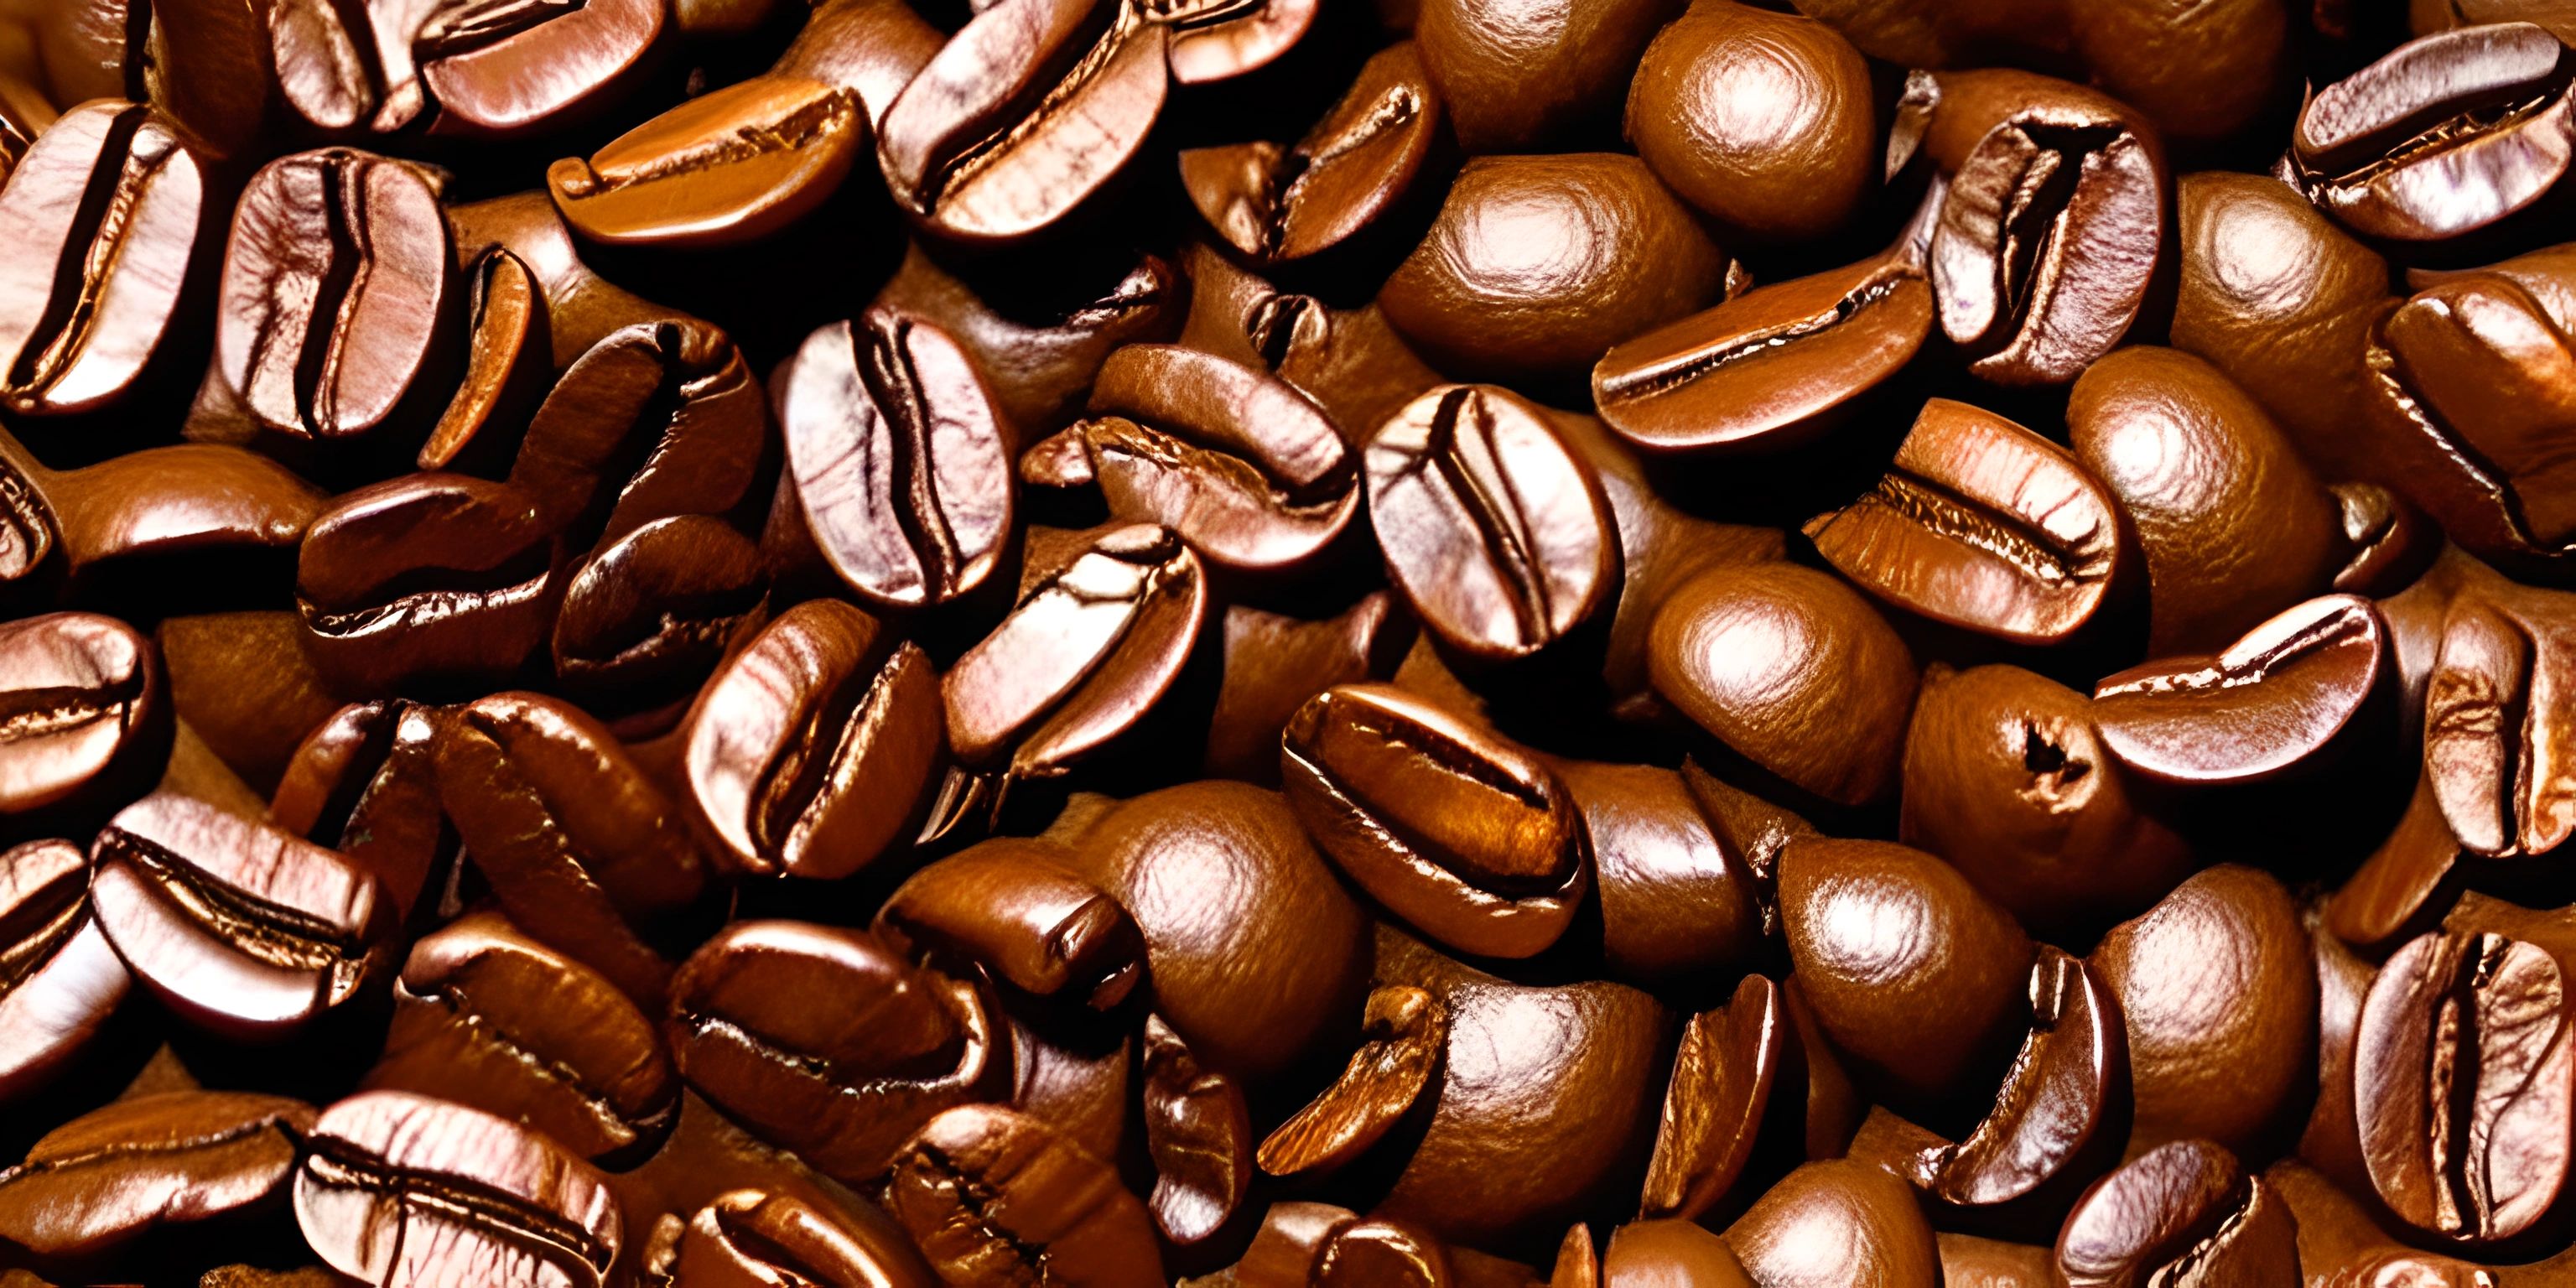 brown coffee beans have shiny speckles on them while scattered together in a group